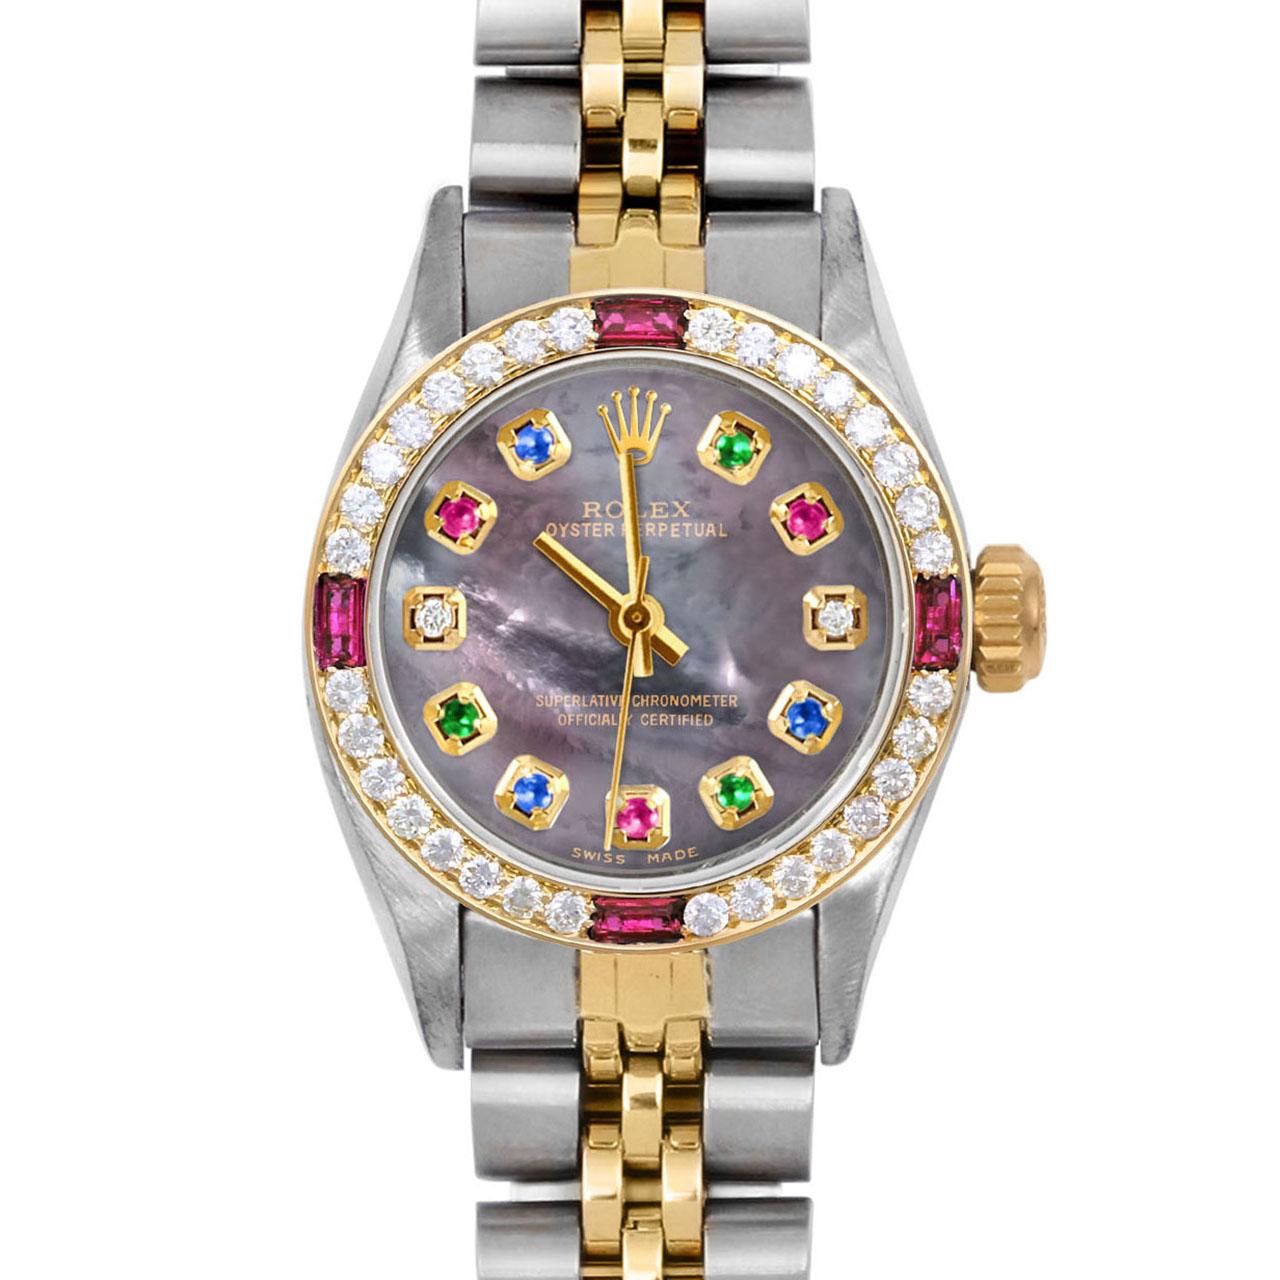 Brand : Rolex
Model : Oyster Perpetual 
Gender : Ladies
Metals : 14K Yellow Gold / Stainless Steel
Case Size : 24 mm

Dial : Custom Tahitian Mother Of Pearl Rainbow Emerald Ruby Sapphire Diamond Dial (This dial is not original Rolex And has been